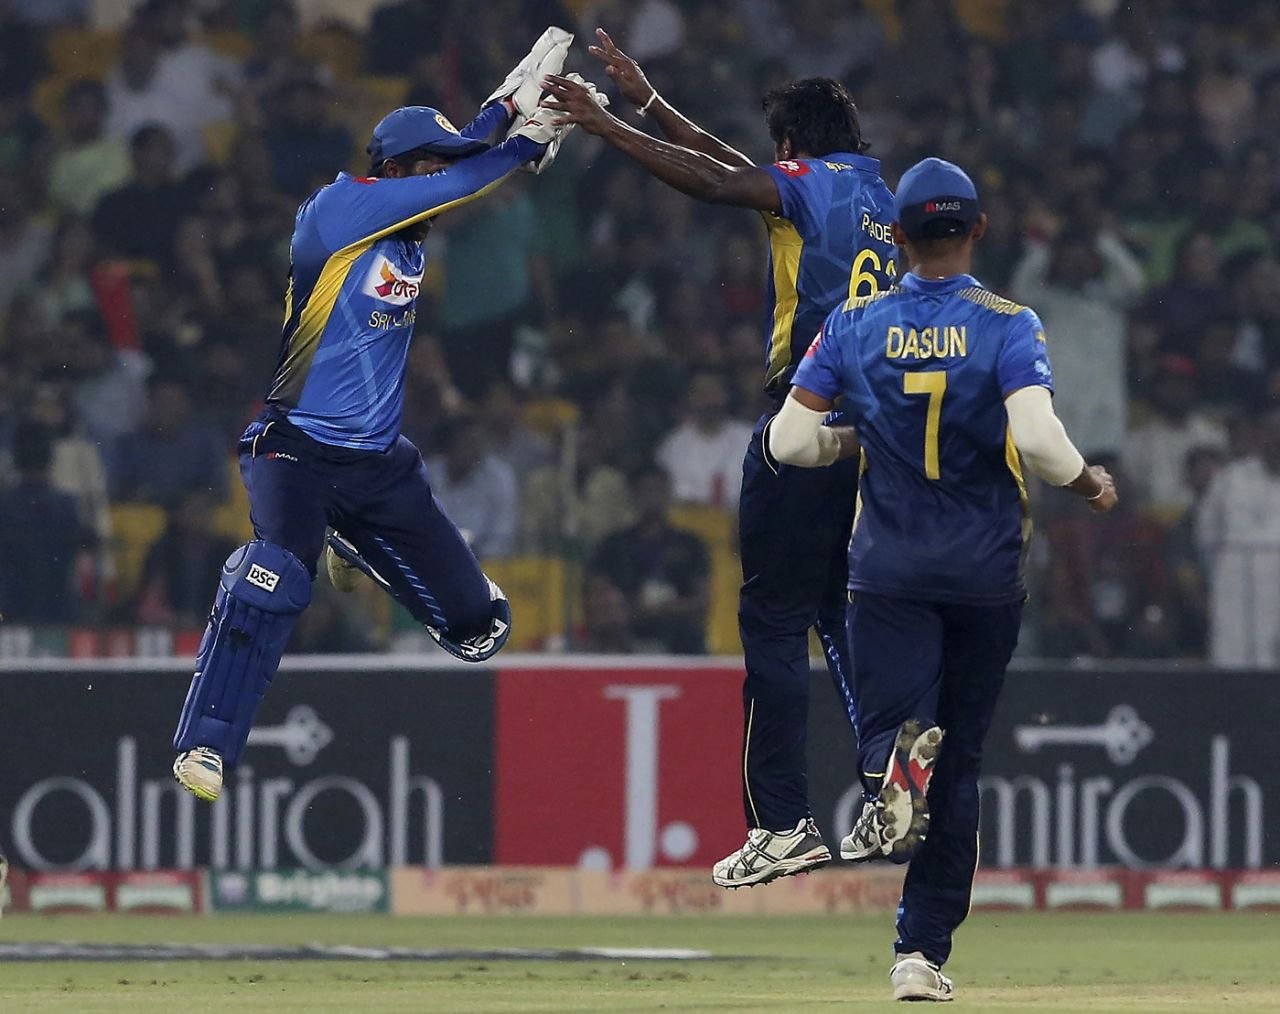 Nuwan Pradeep and Sri Lanka's bowlers were excellent from the get go, Pakistan v Sri Lanka, 1st T20I, Lahore, October 5, 2019